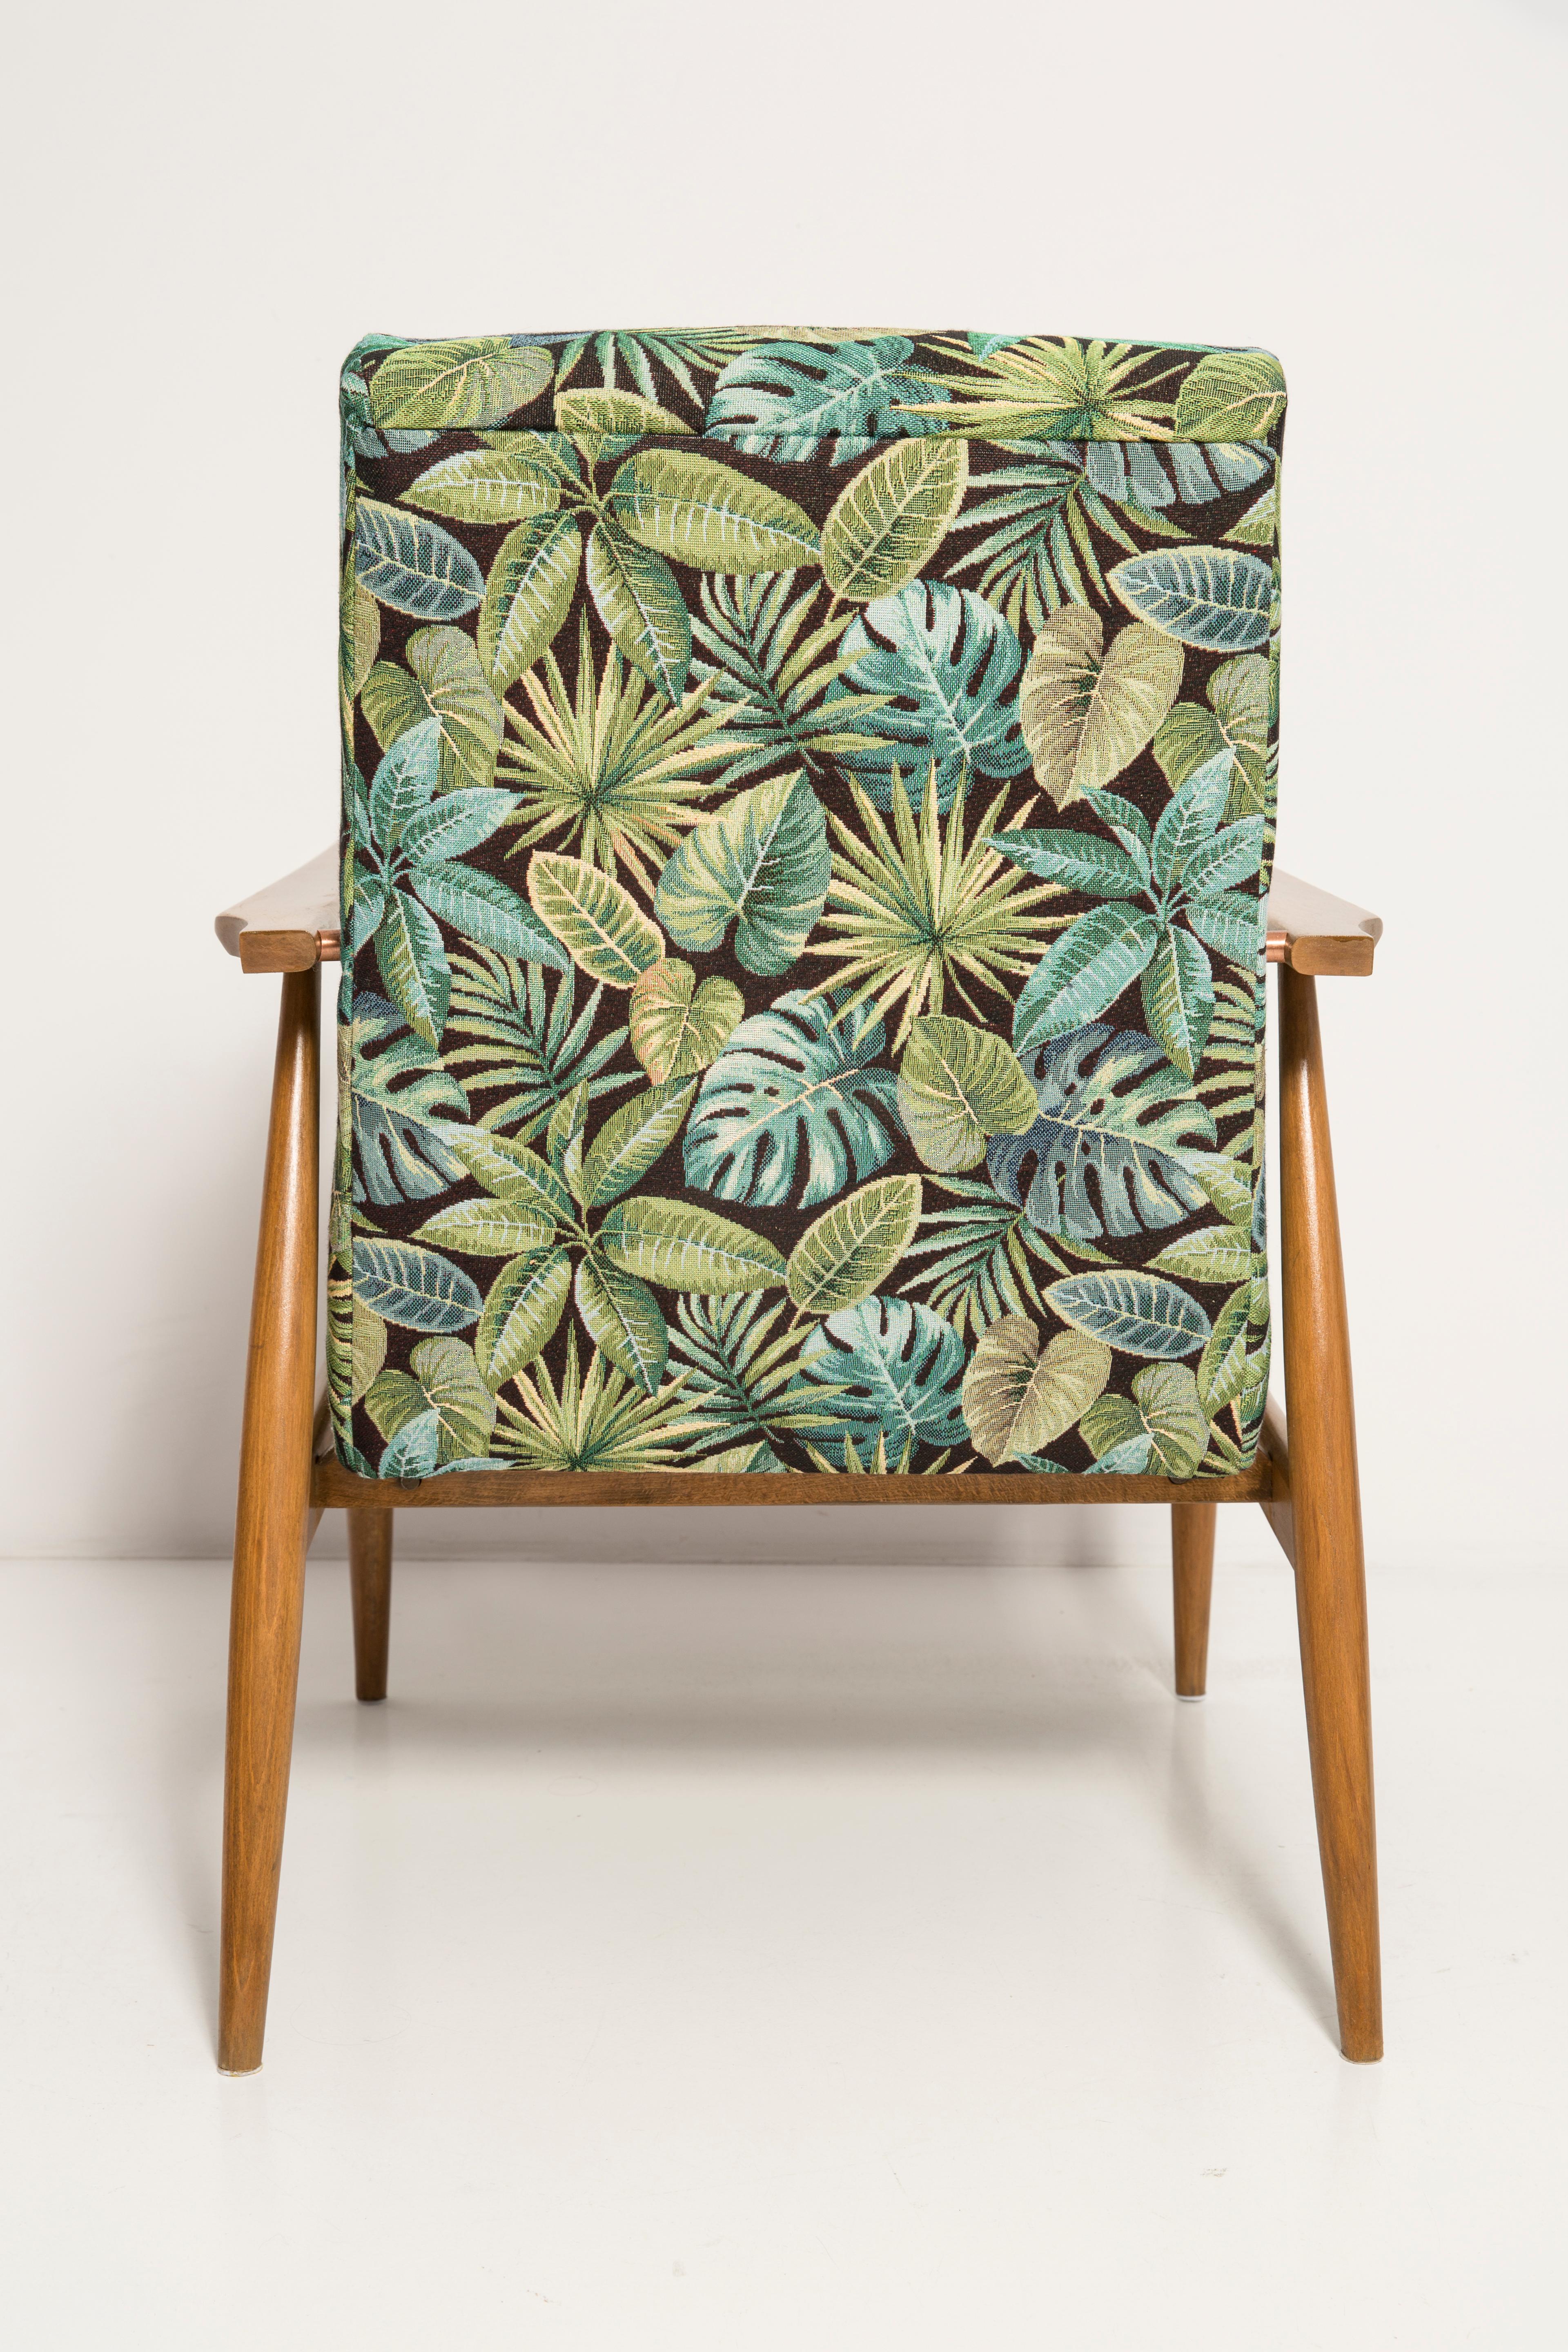 Pair of Mid-Century Green Leaves Jacquard Dante Armchairs, H. Lis, 1960s For Sale 5